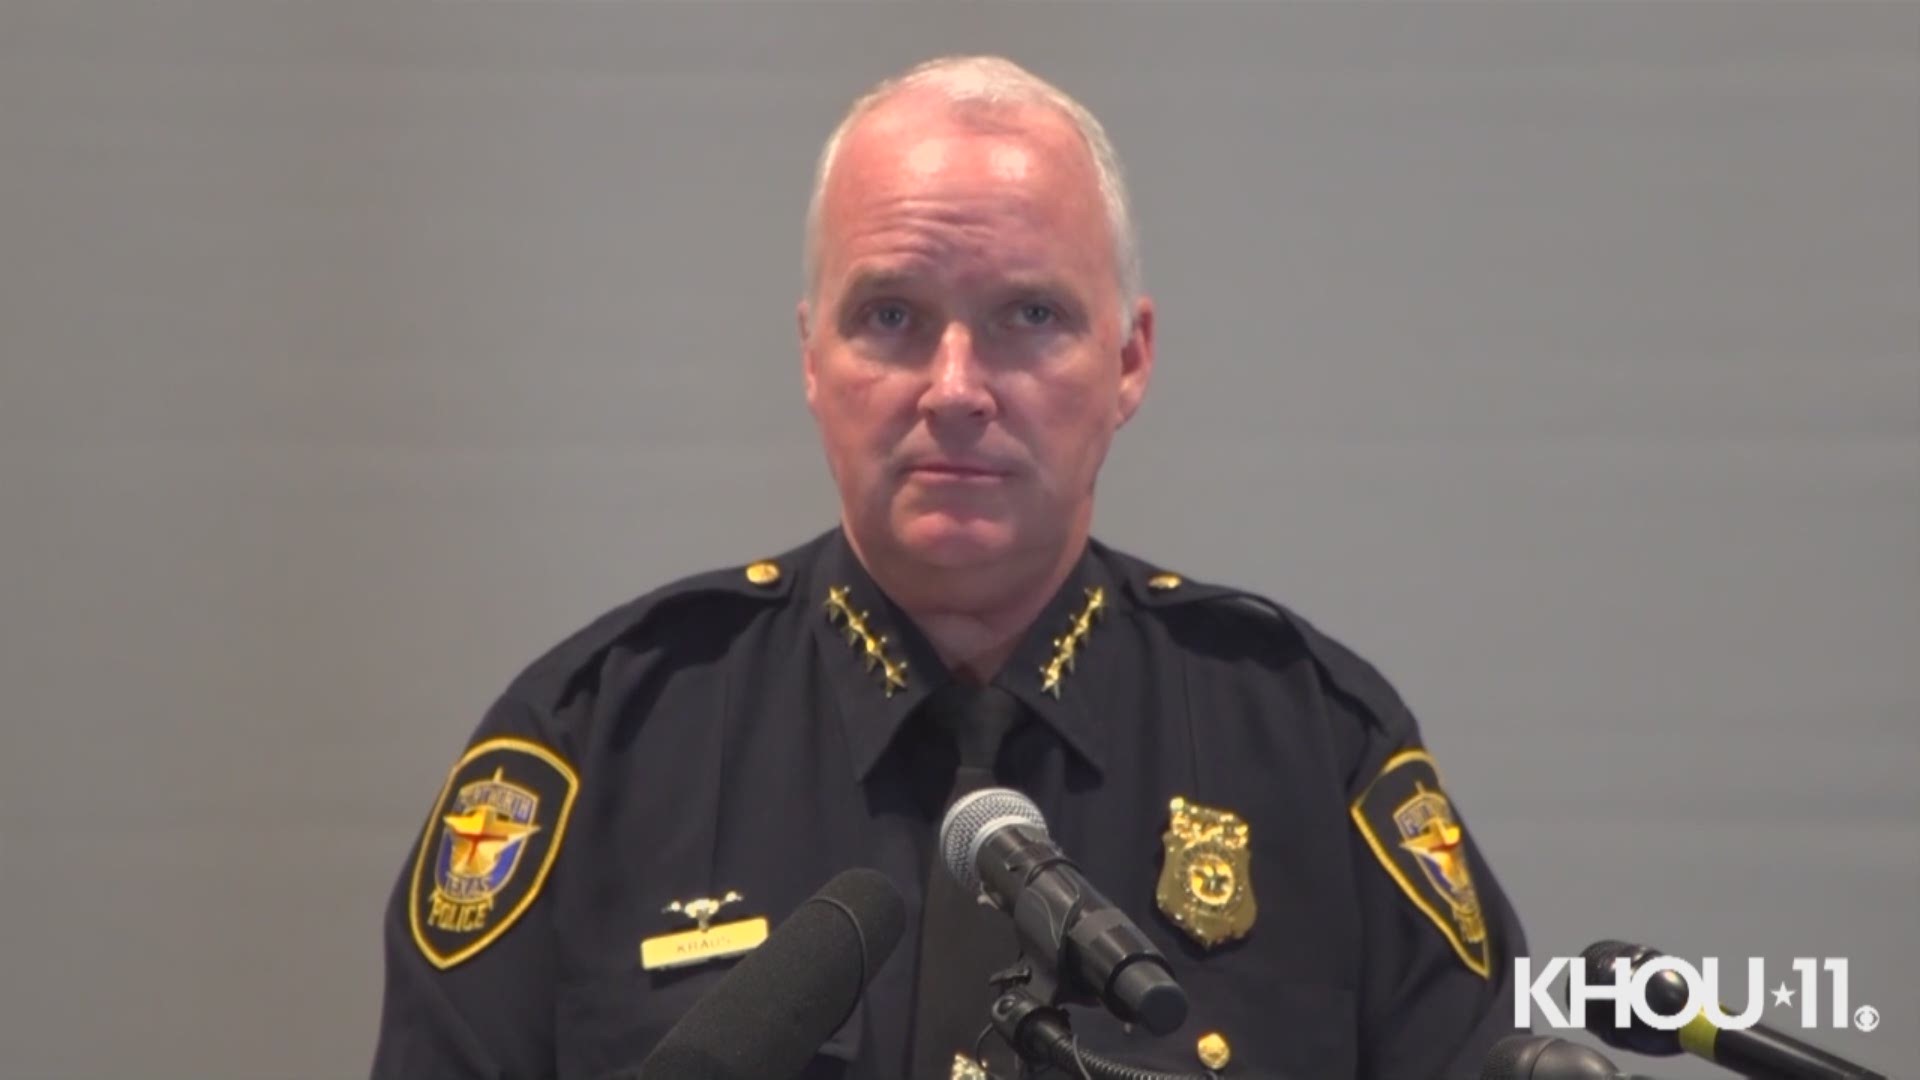 Fort Worth Interim Police Chief Ed Kraus became emotional when asked about department morale following during the Atatiana Jefferson murder case.